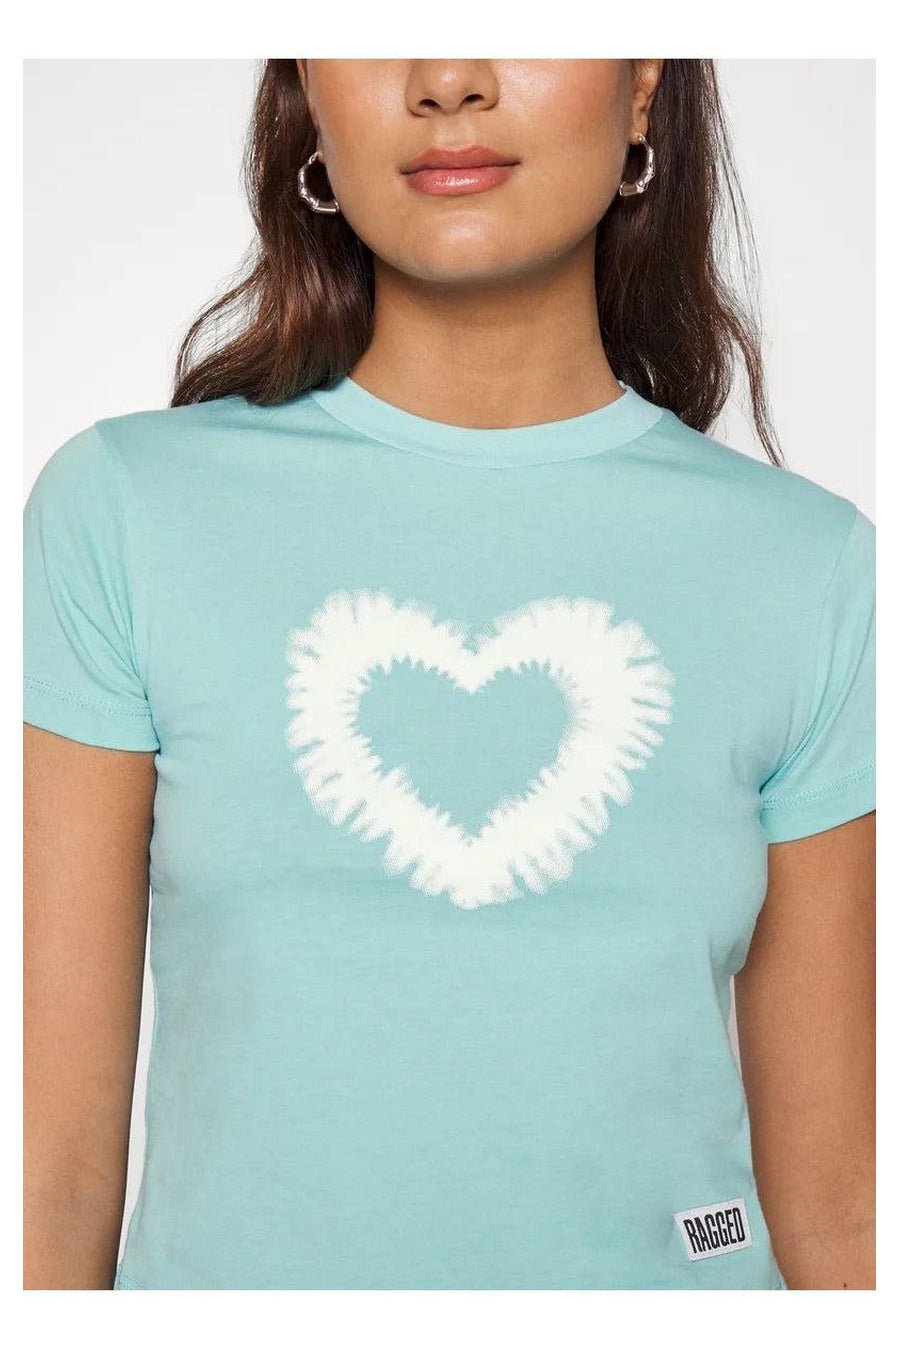 Buy The Ragged Priest Valentine Heart Ringer Tee at Spoiled Brat  Online - UK online Fashion &amp; lifestyle boutique